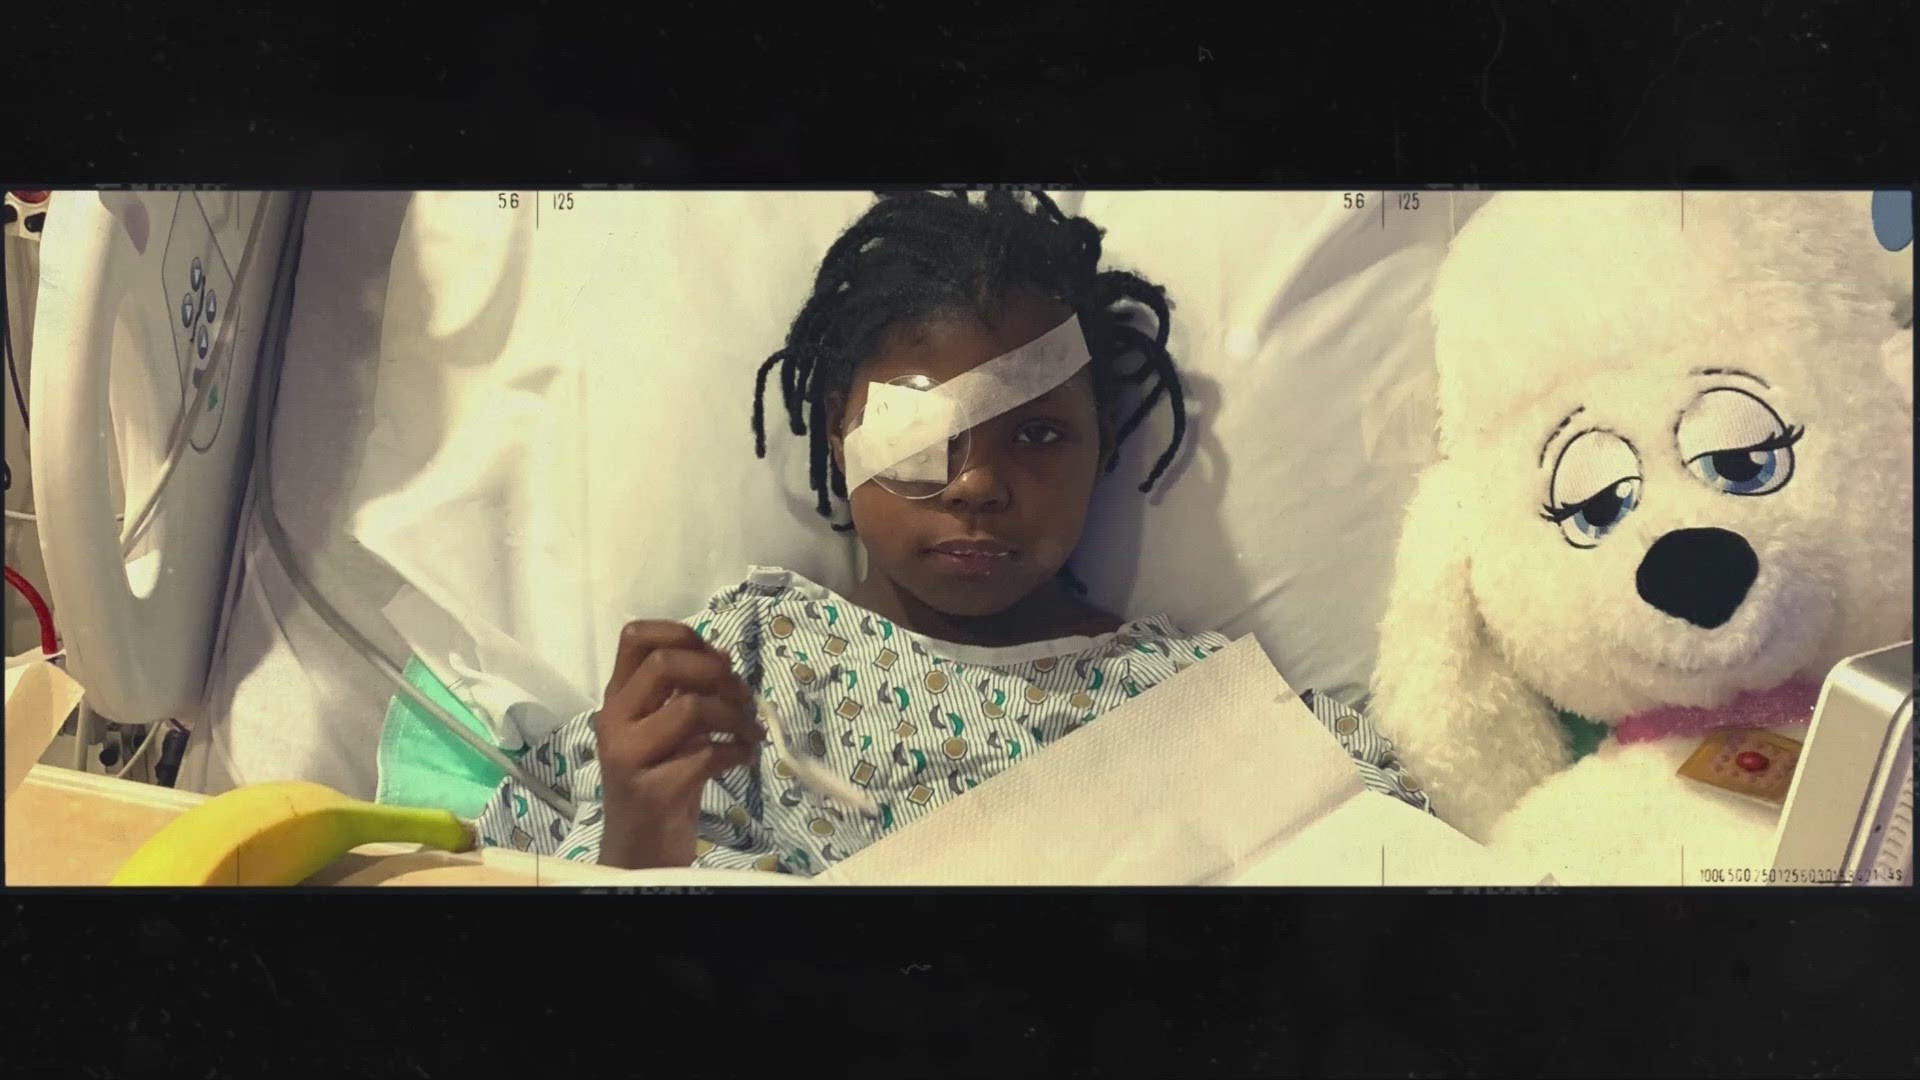 Nyairra Green was shot in the eye by a stray bullet and has had a long road to recovery. Now, she wants to share her story.